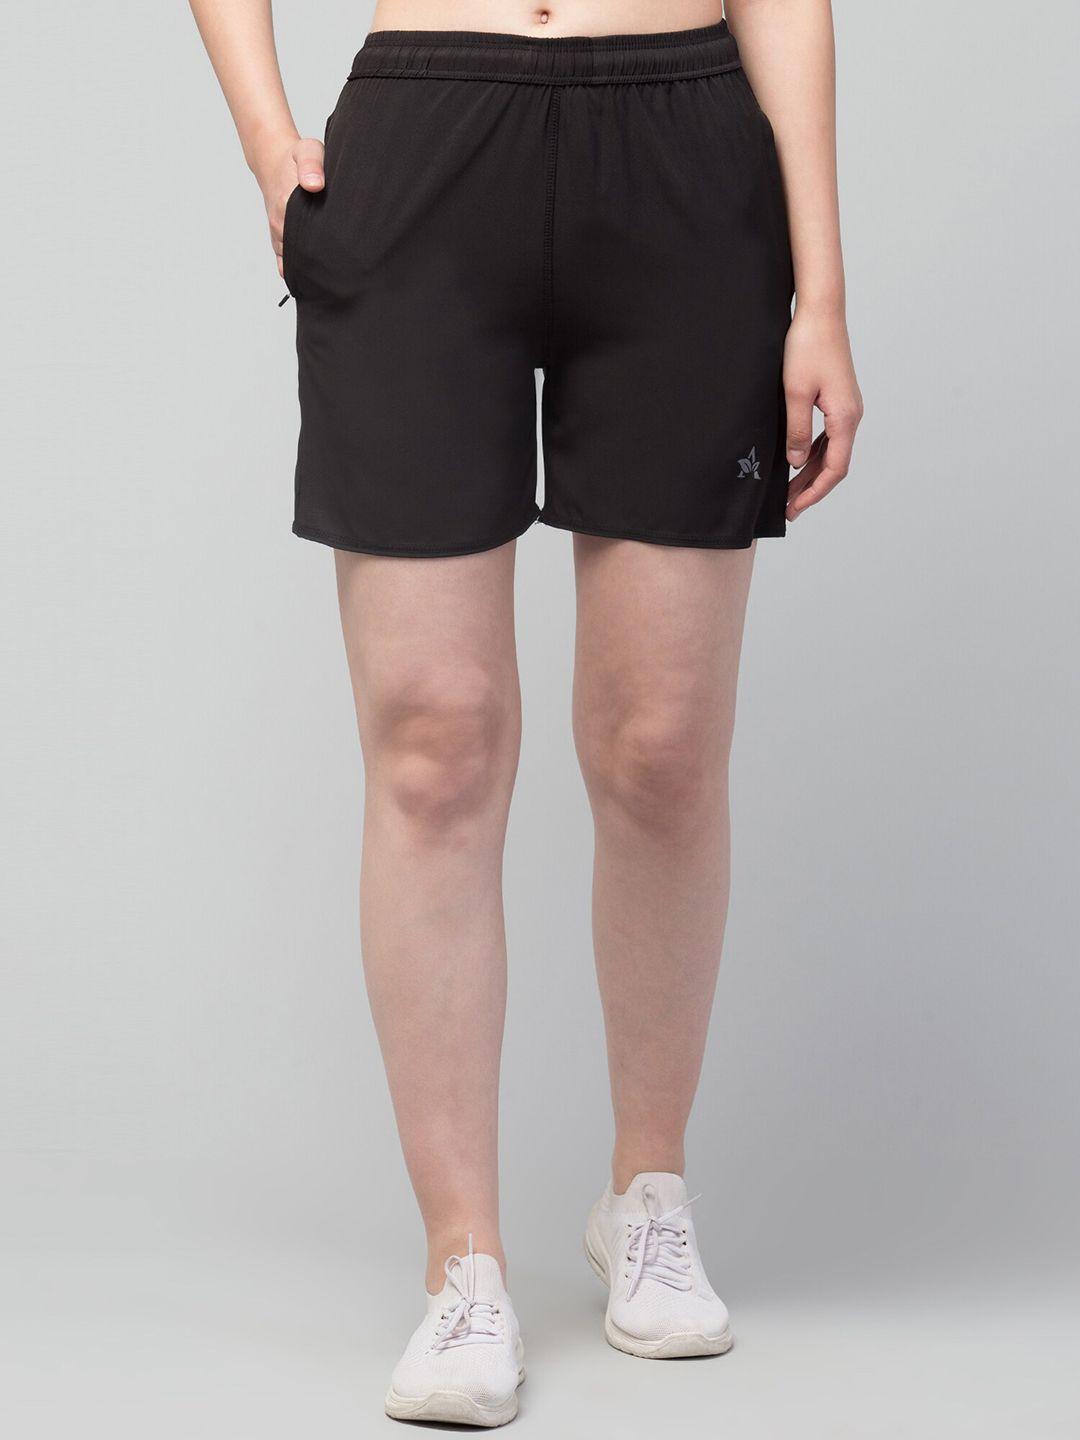 apraa & parma women outdoor sports shorts with e-dry technology